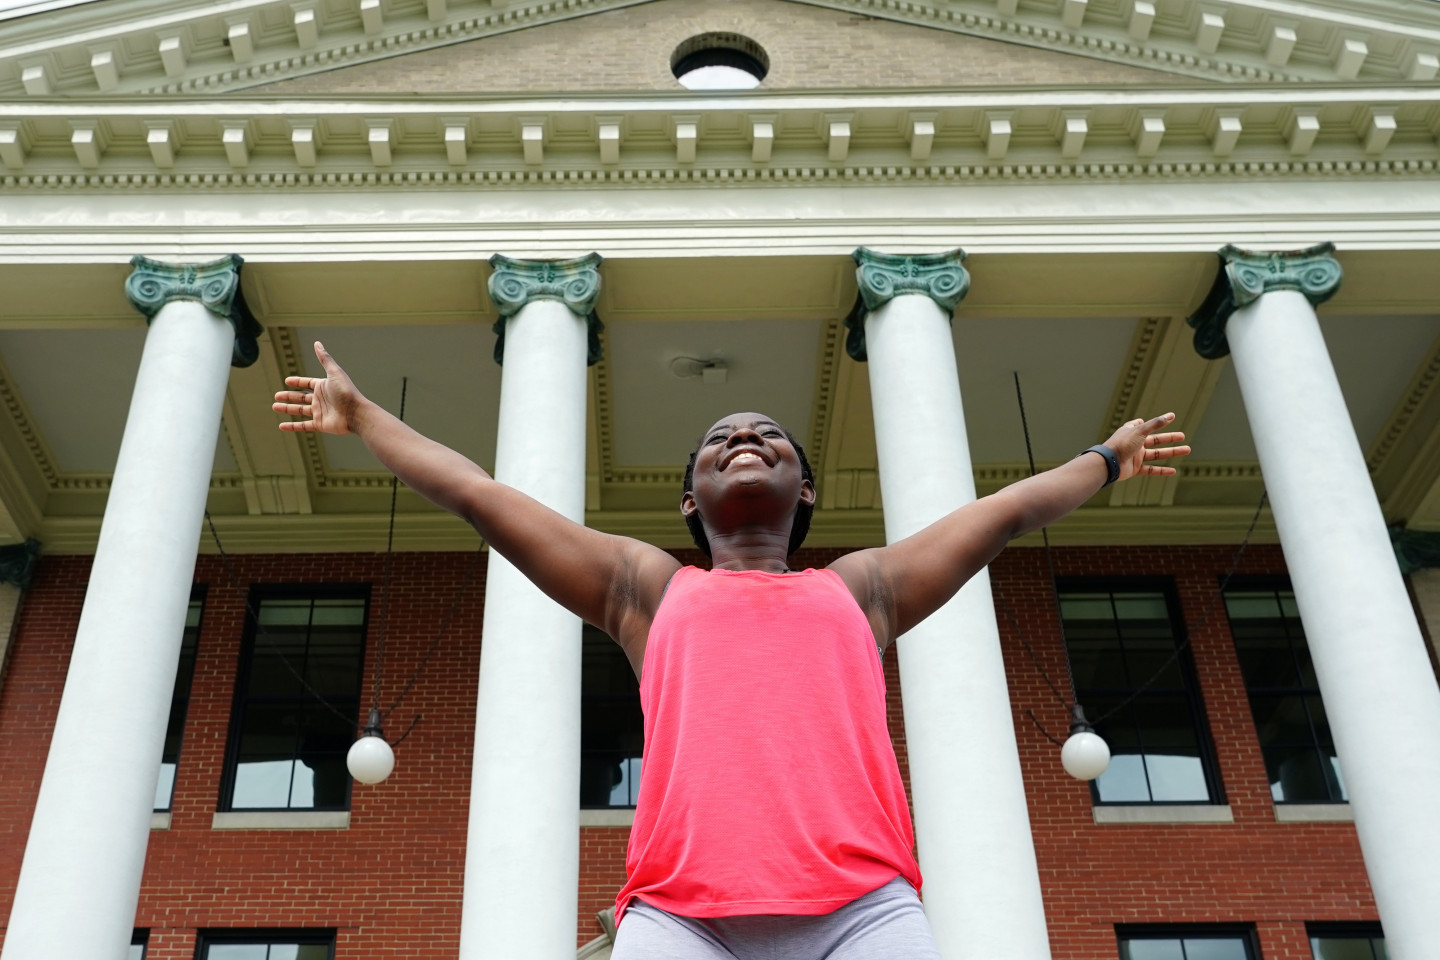 A student stands with her arms outstretched in front of Heritage Hall.